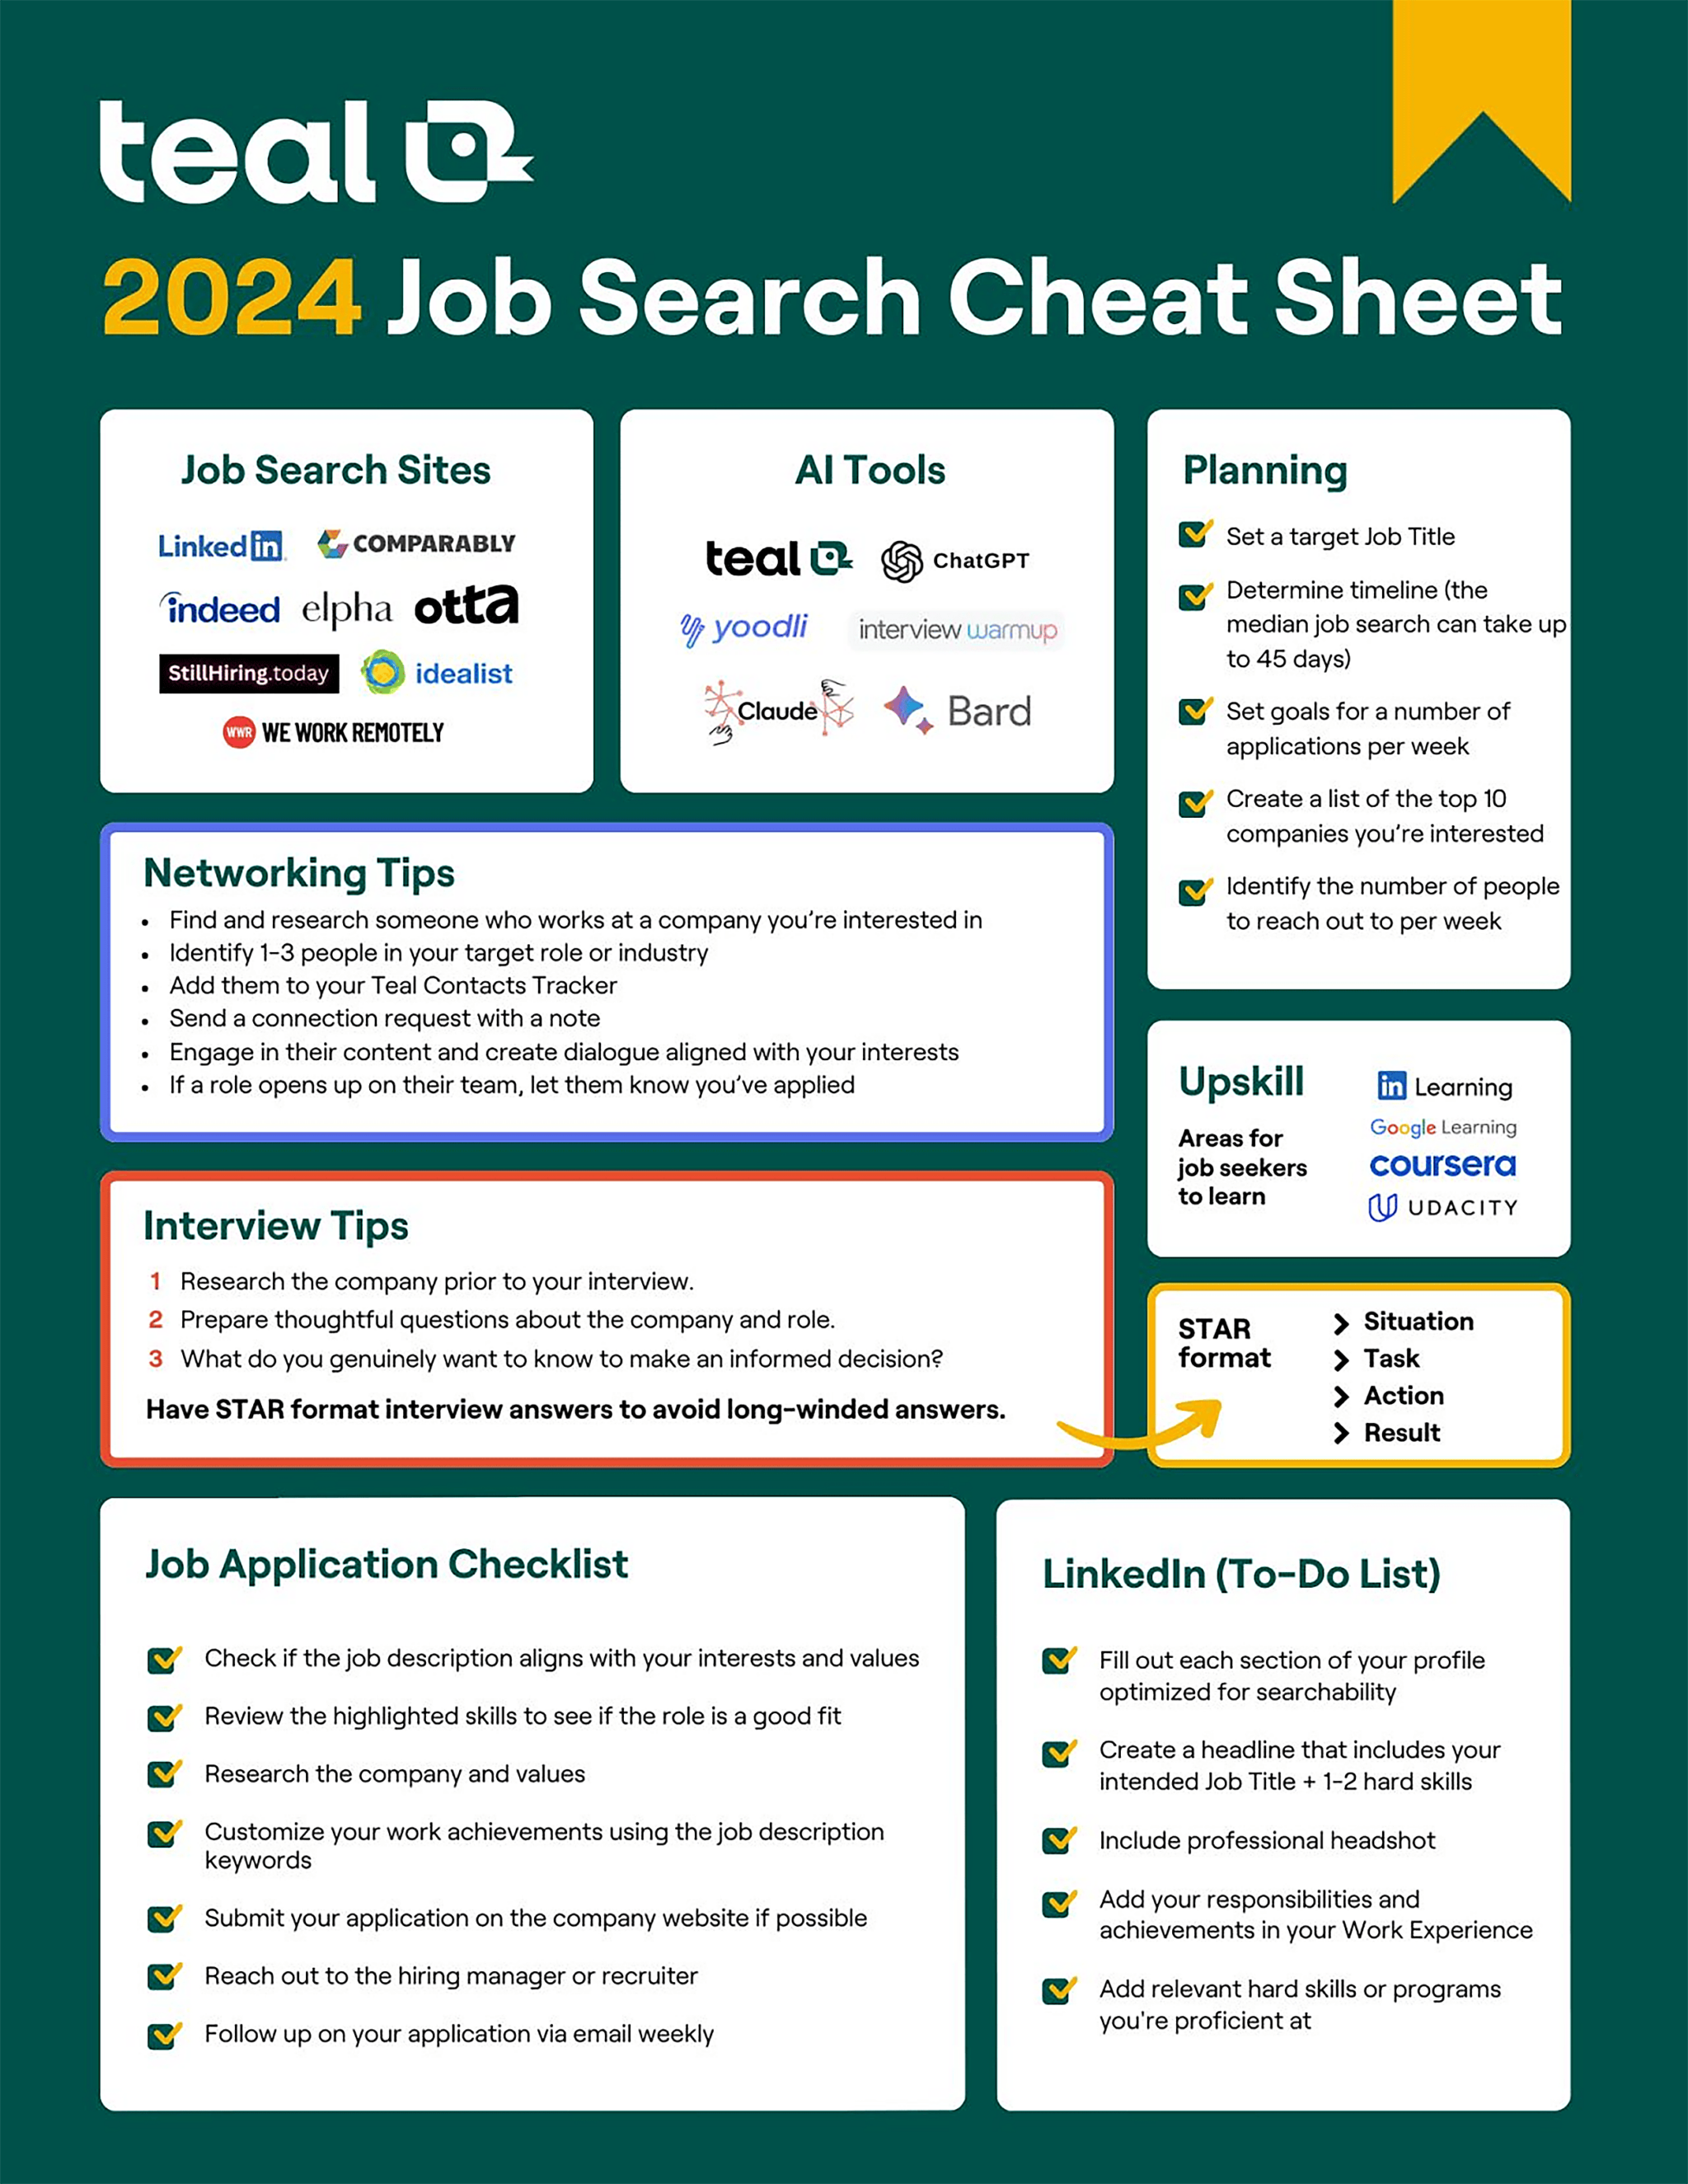 teal-job-cheat-sheet 22 Content Marketing Examples to Inspire You